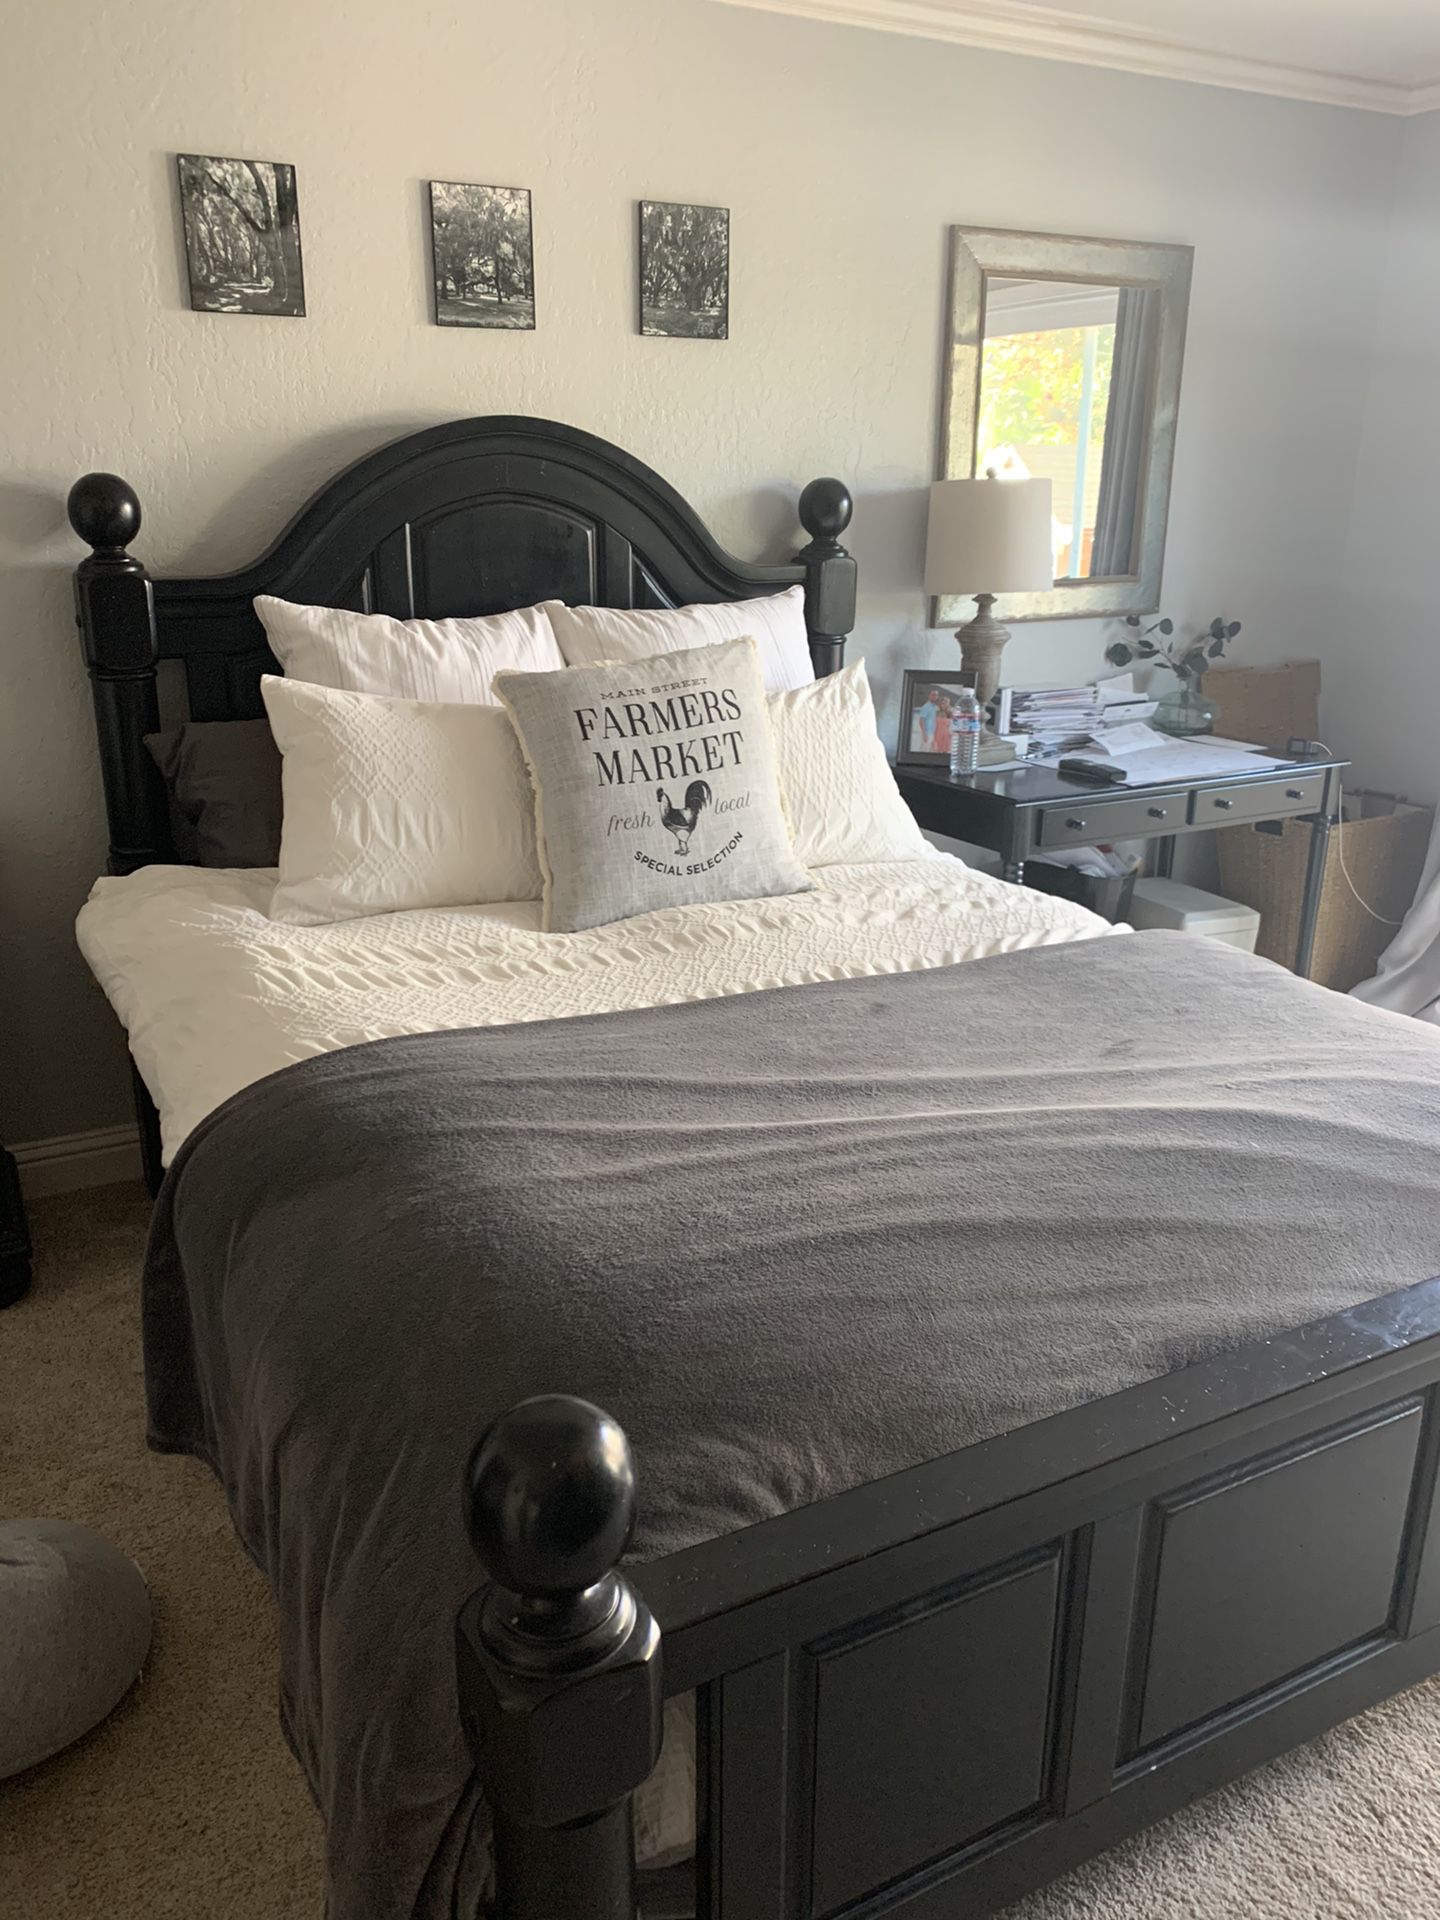 Queen bed with free mattress.